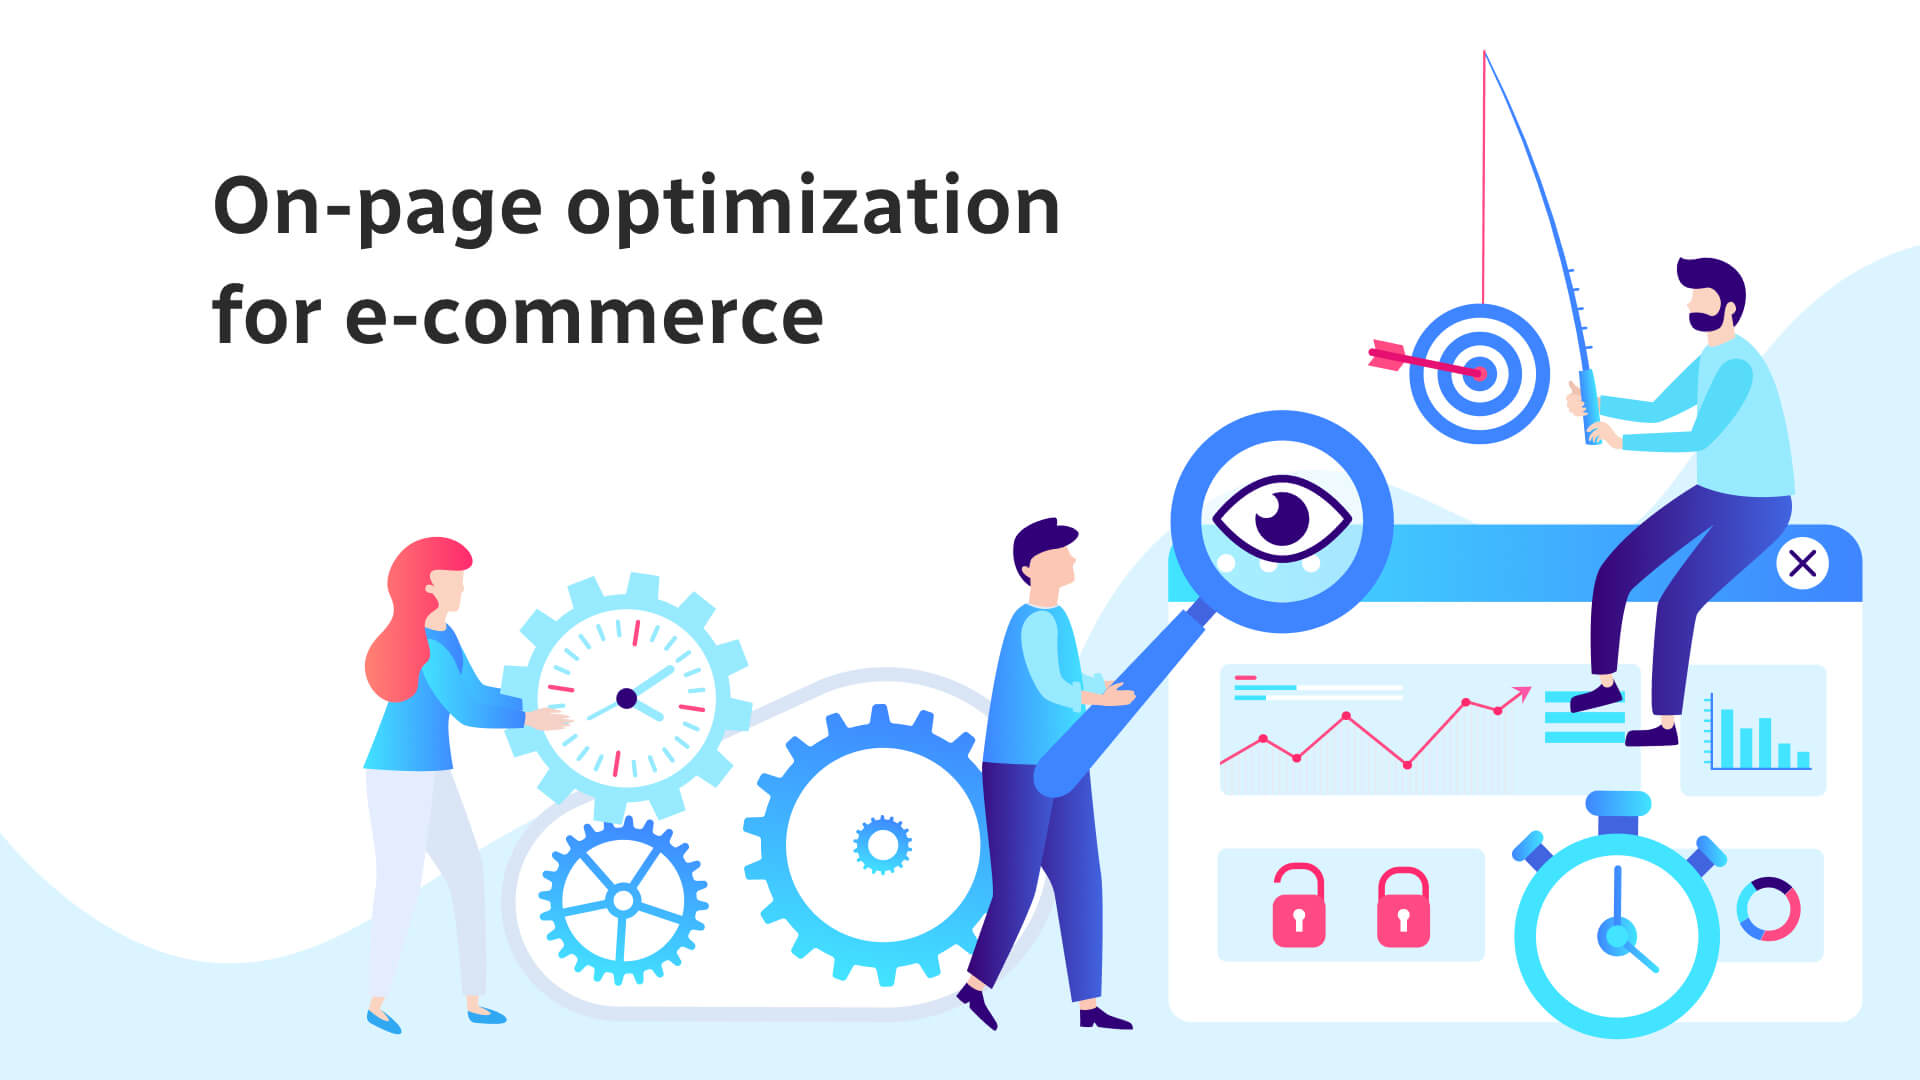 On-page optimization for e-commerce